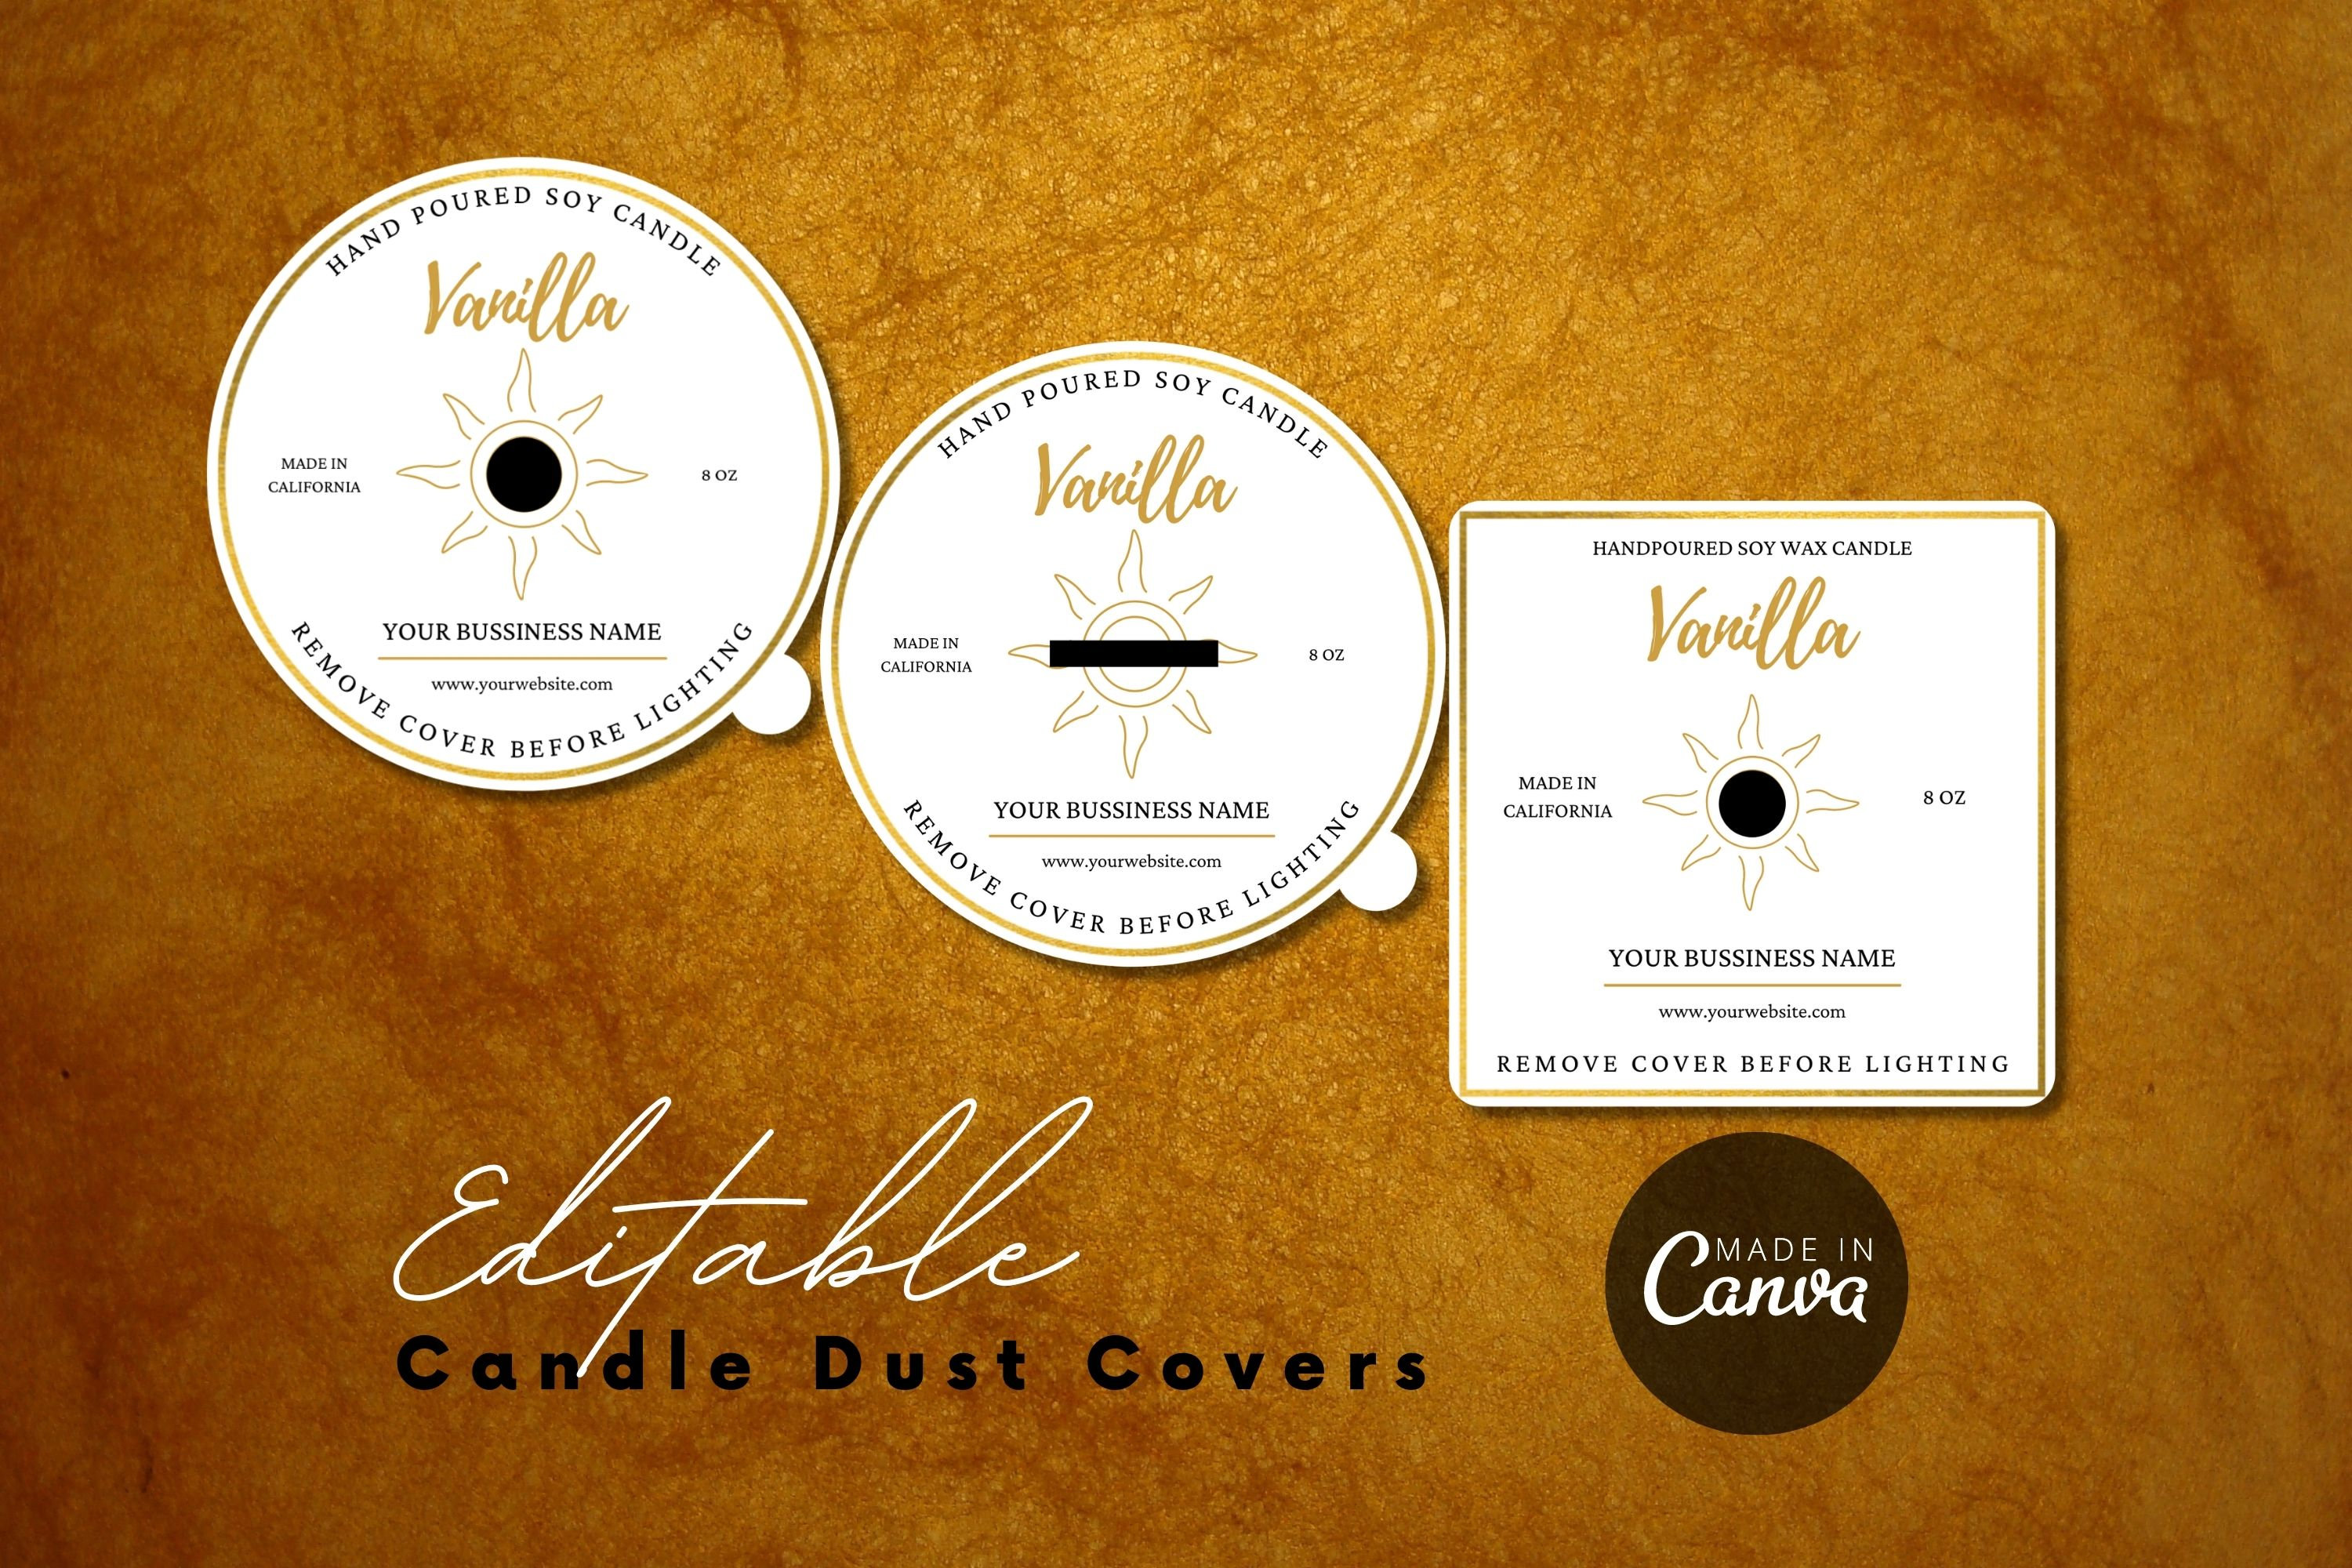 Candle Dust Cover Template, Editable & Printable Candle Dust, Boho